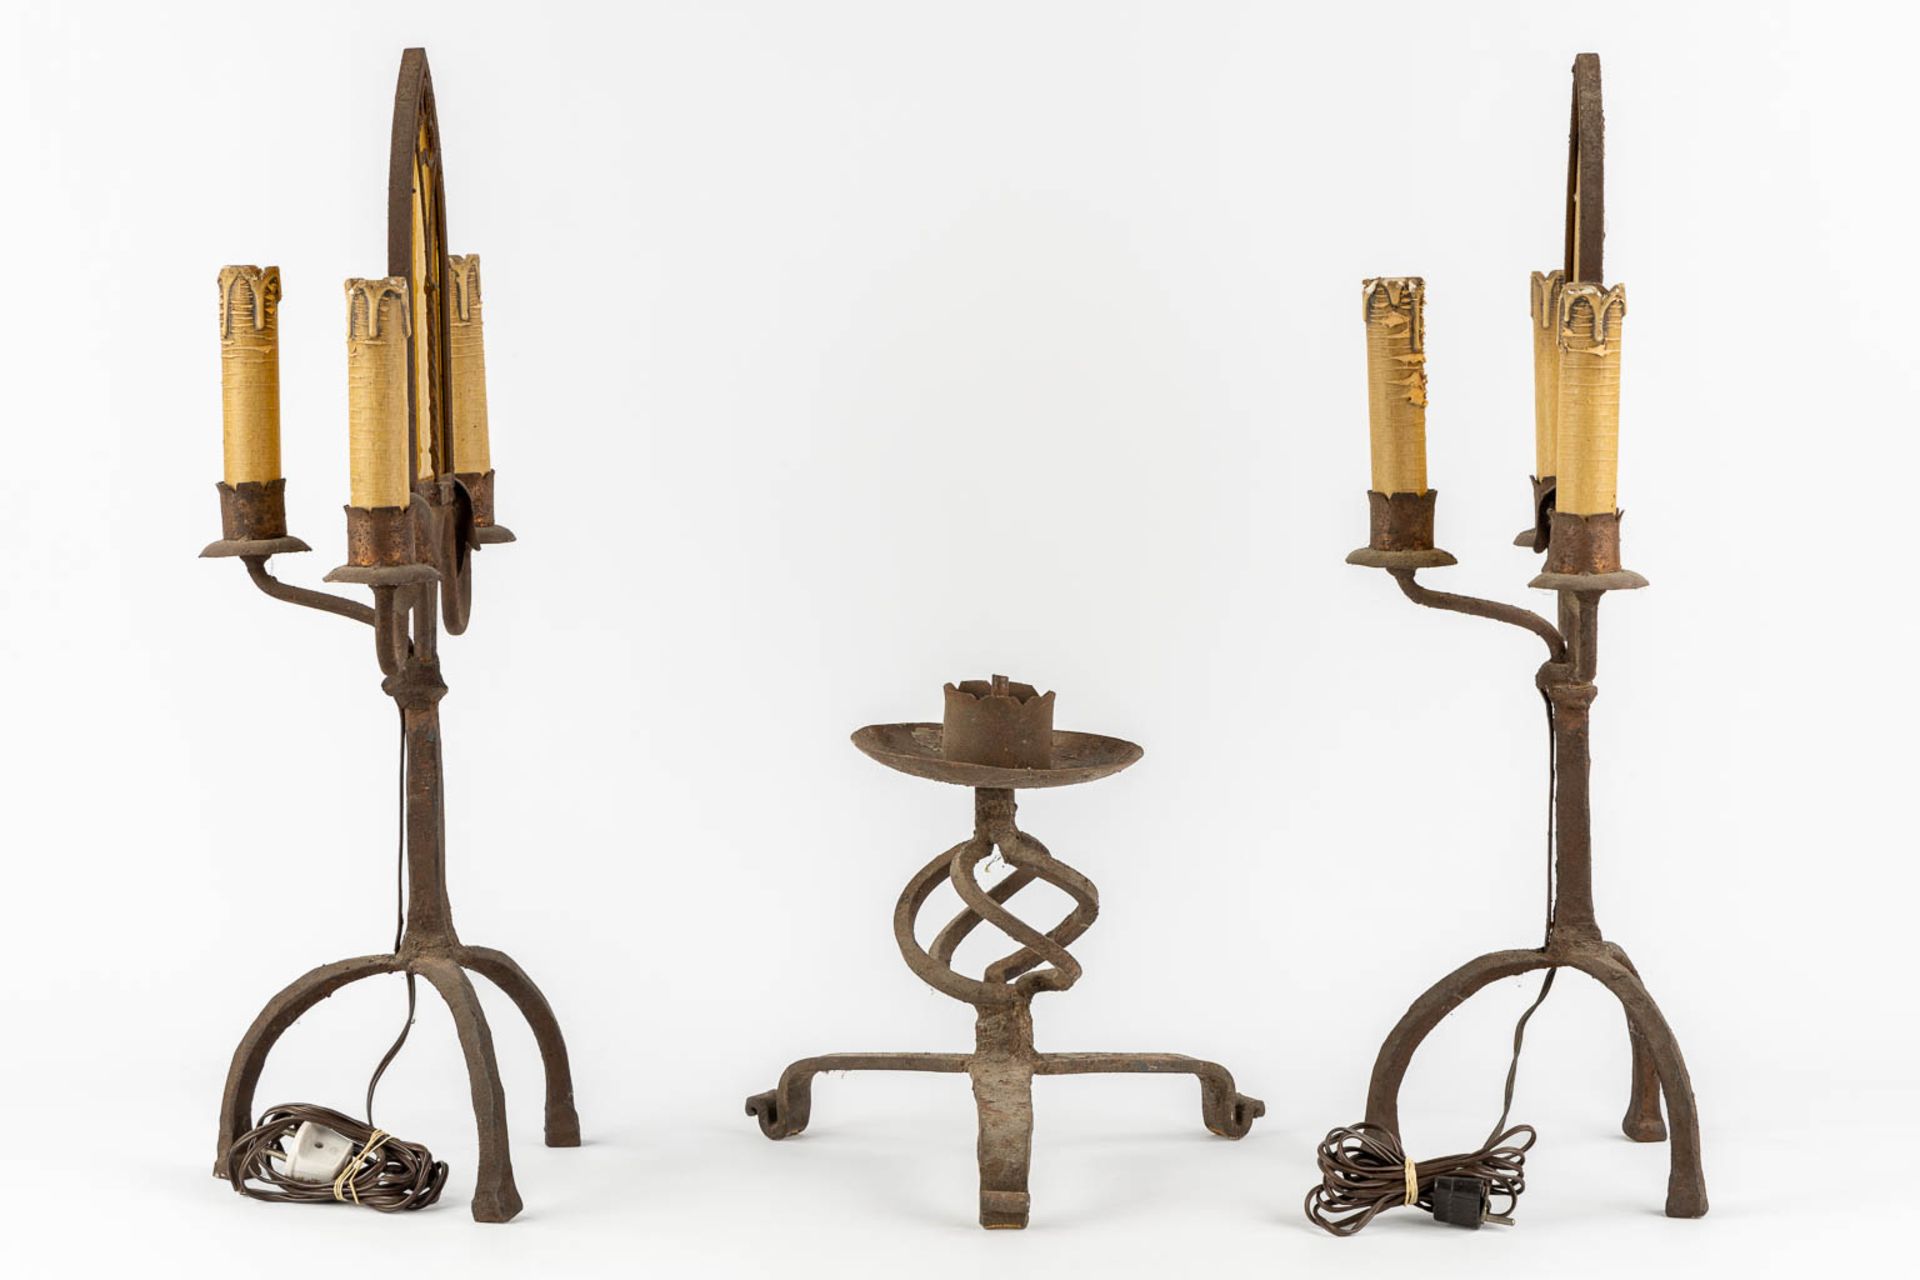 A pair of wrought iron table lamps in a Gothic Revival style. Added a candlestick. (H:63 cm) - Image 4 of 9